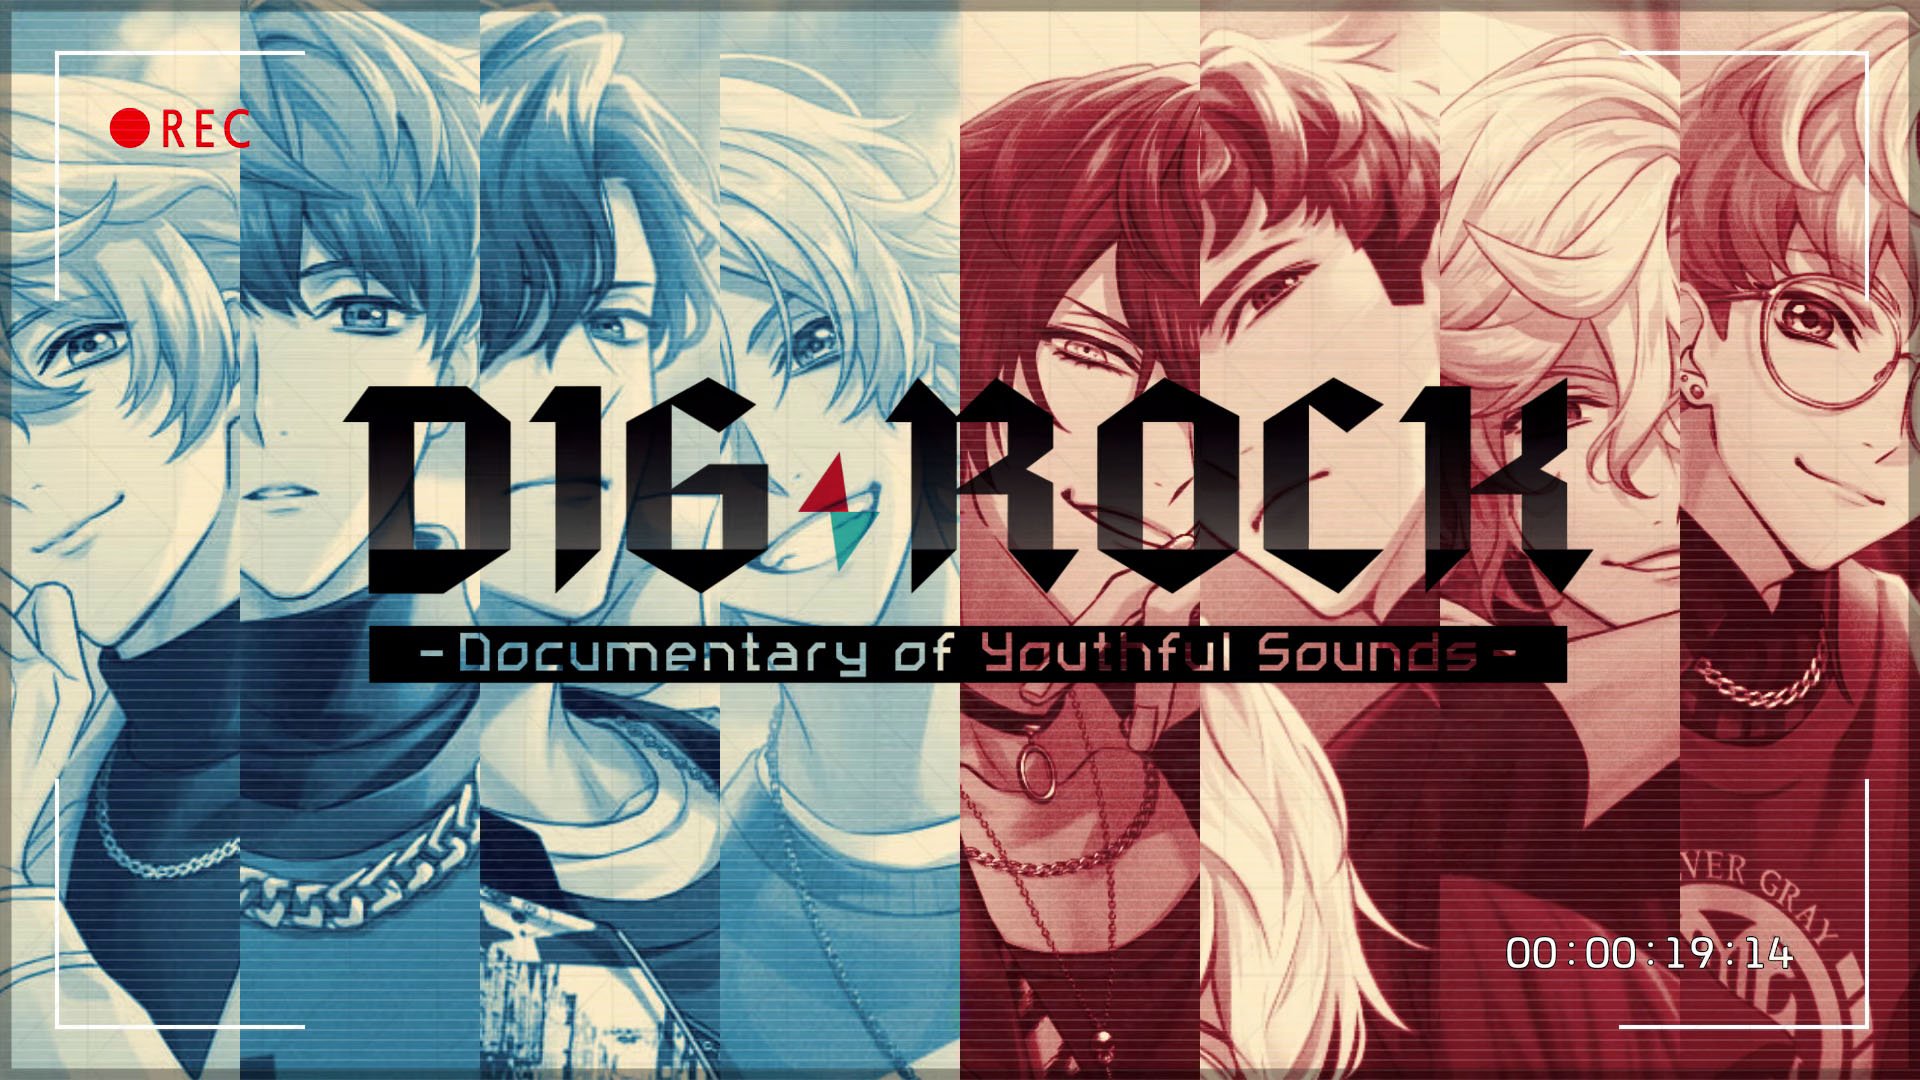 Otome visual novel DIG-ROCK: Documentary of Youthful Sounds announced for  Switch - Gematsu